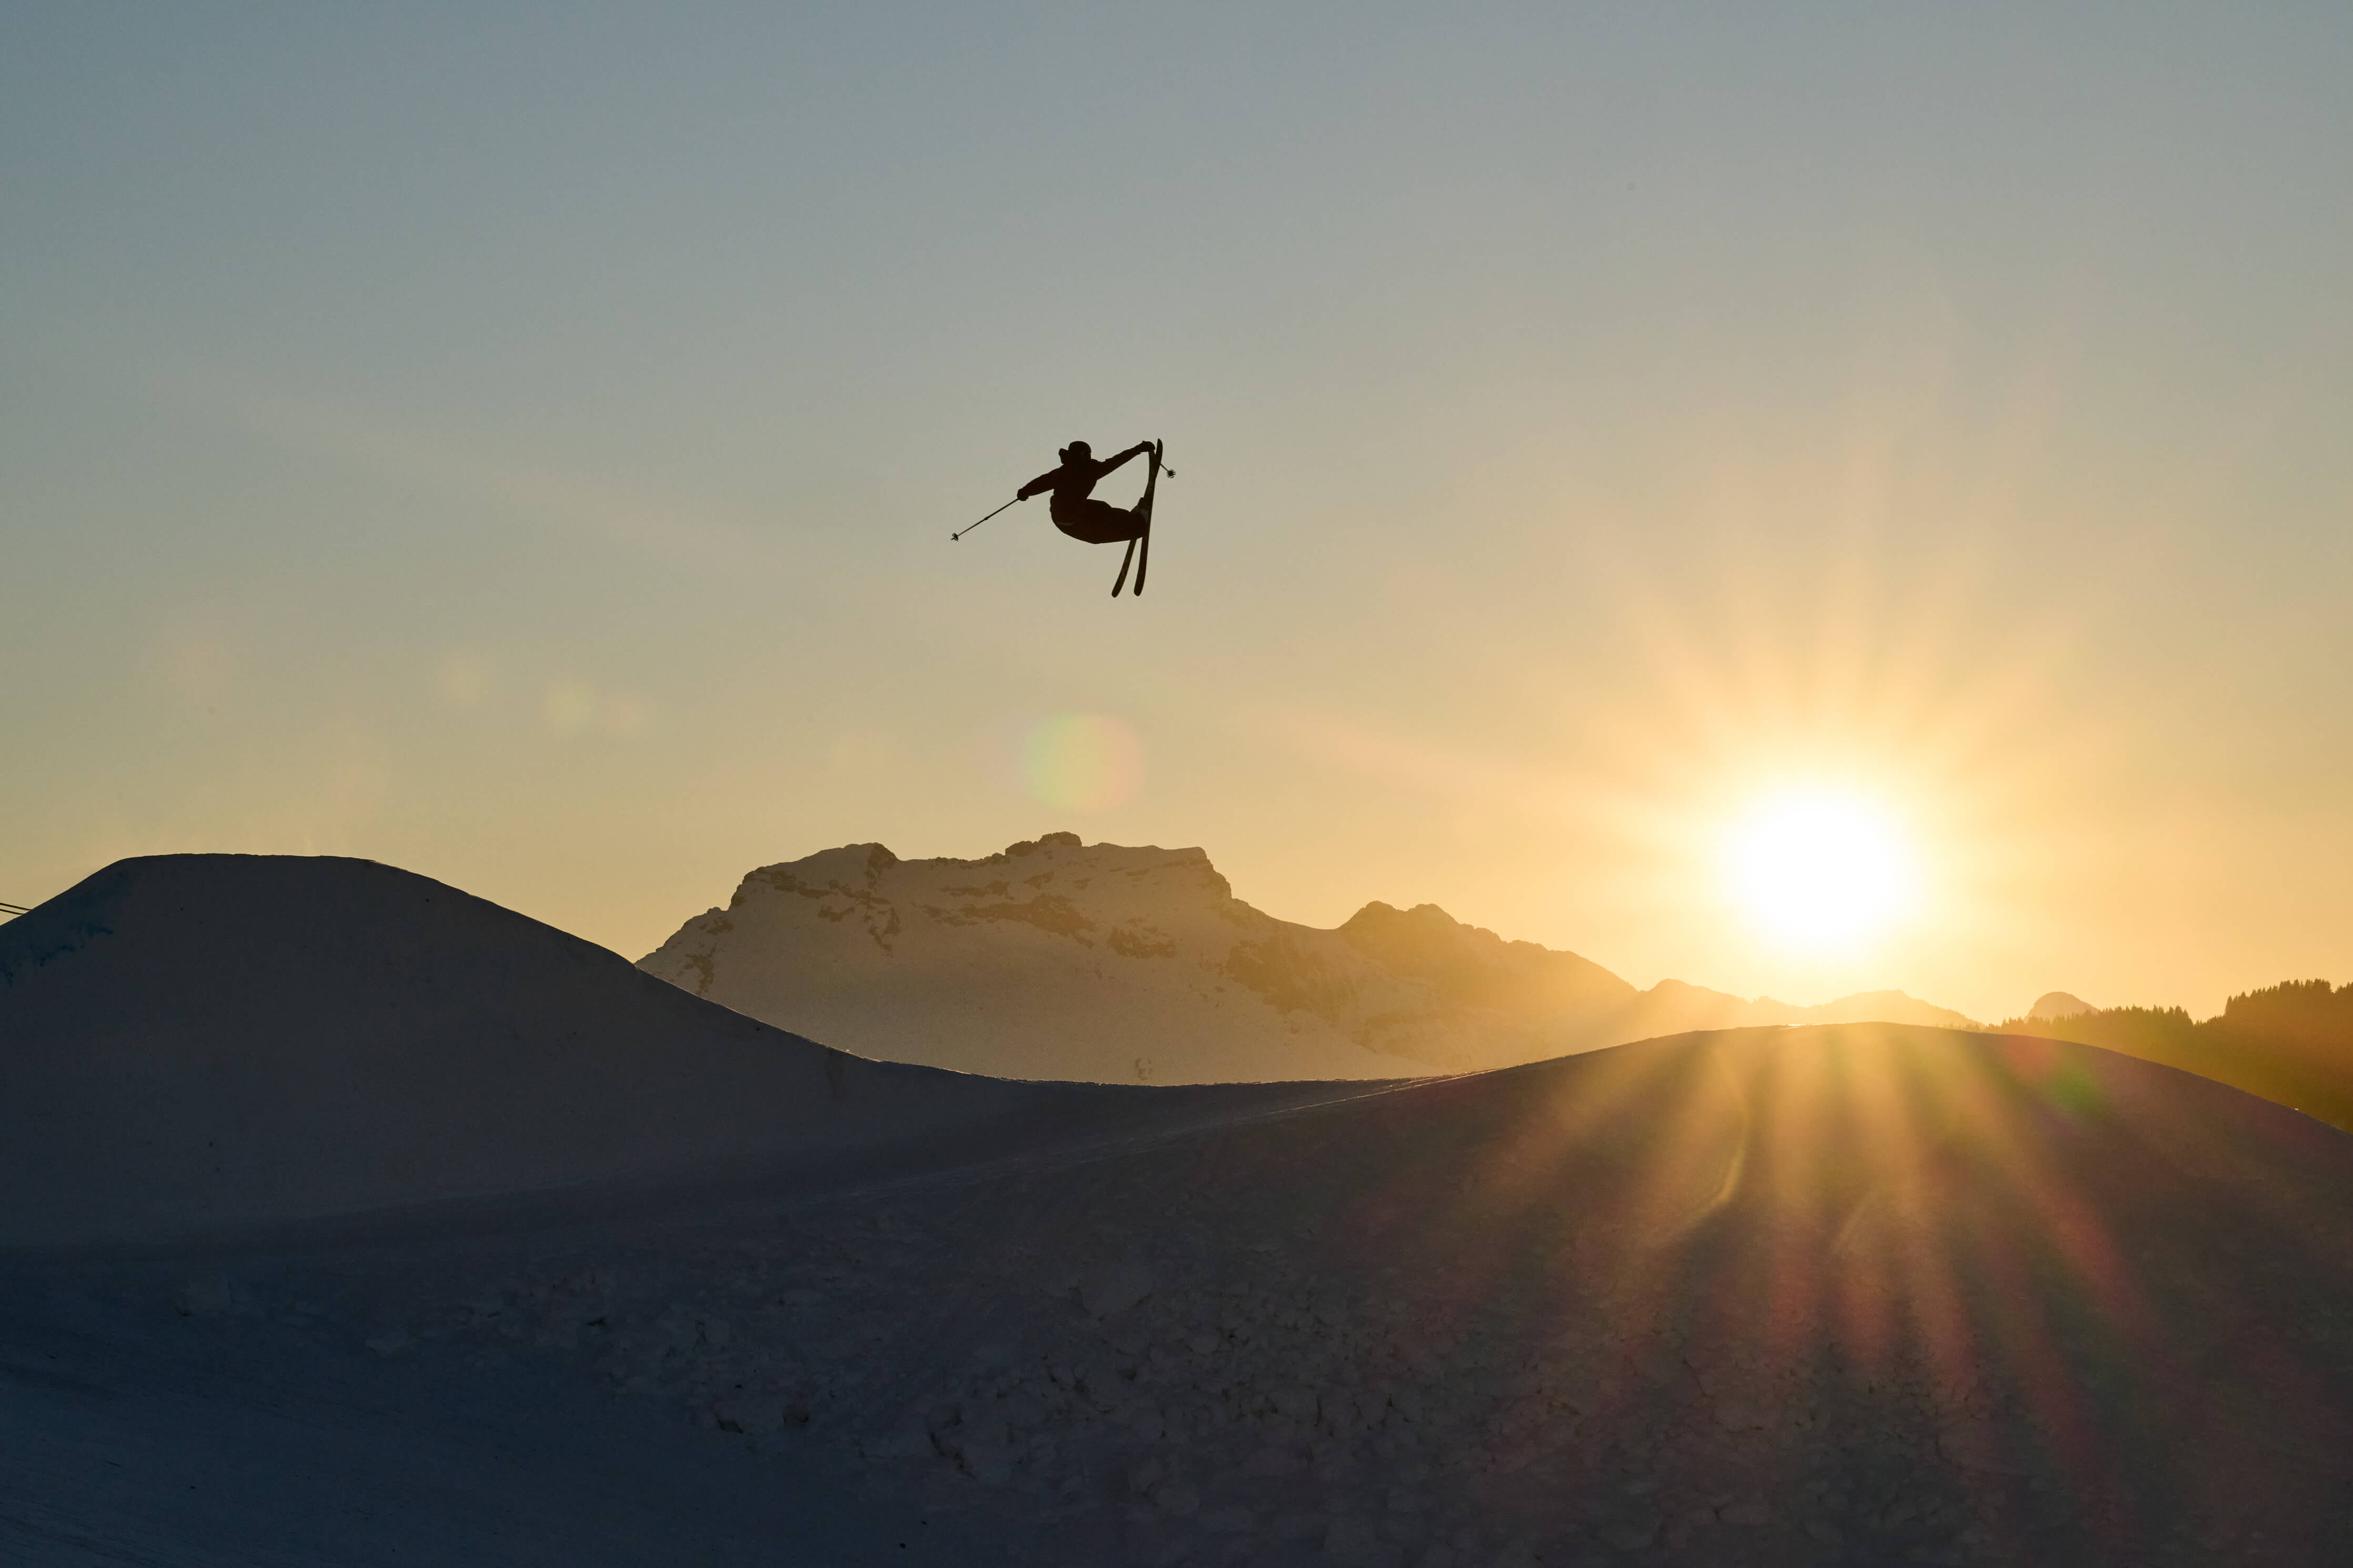 A Movement freestyle skier in La Clusaz for a sunset session.